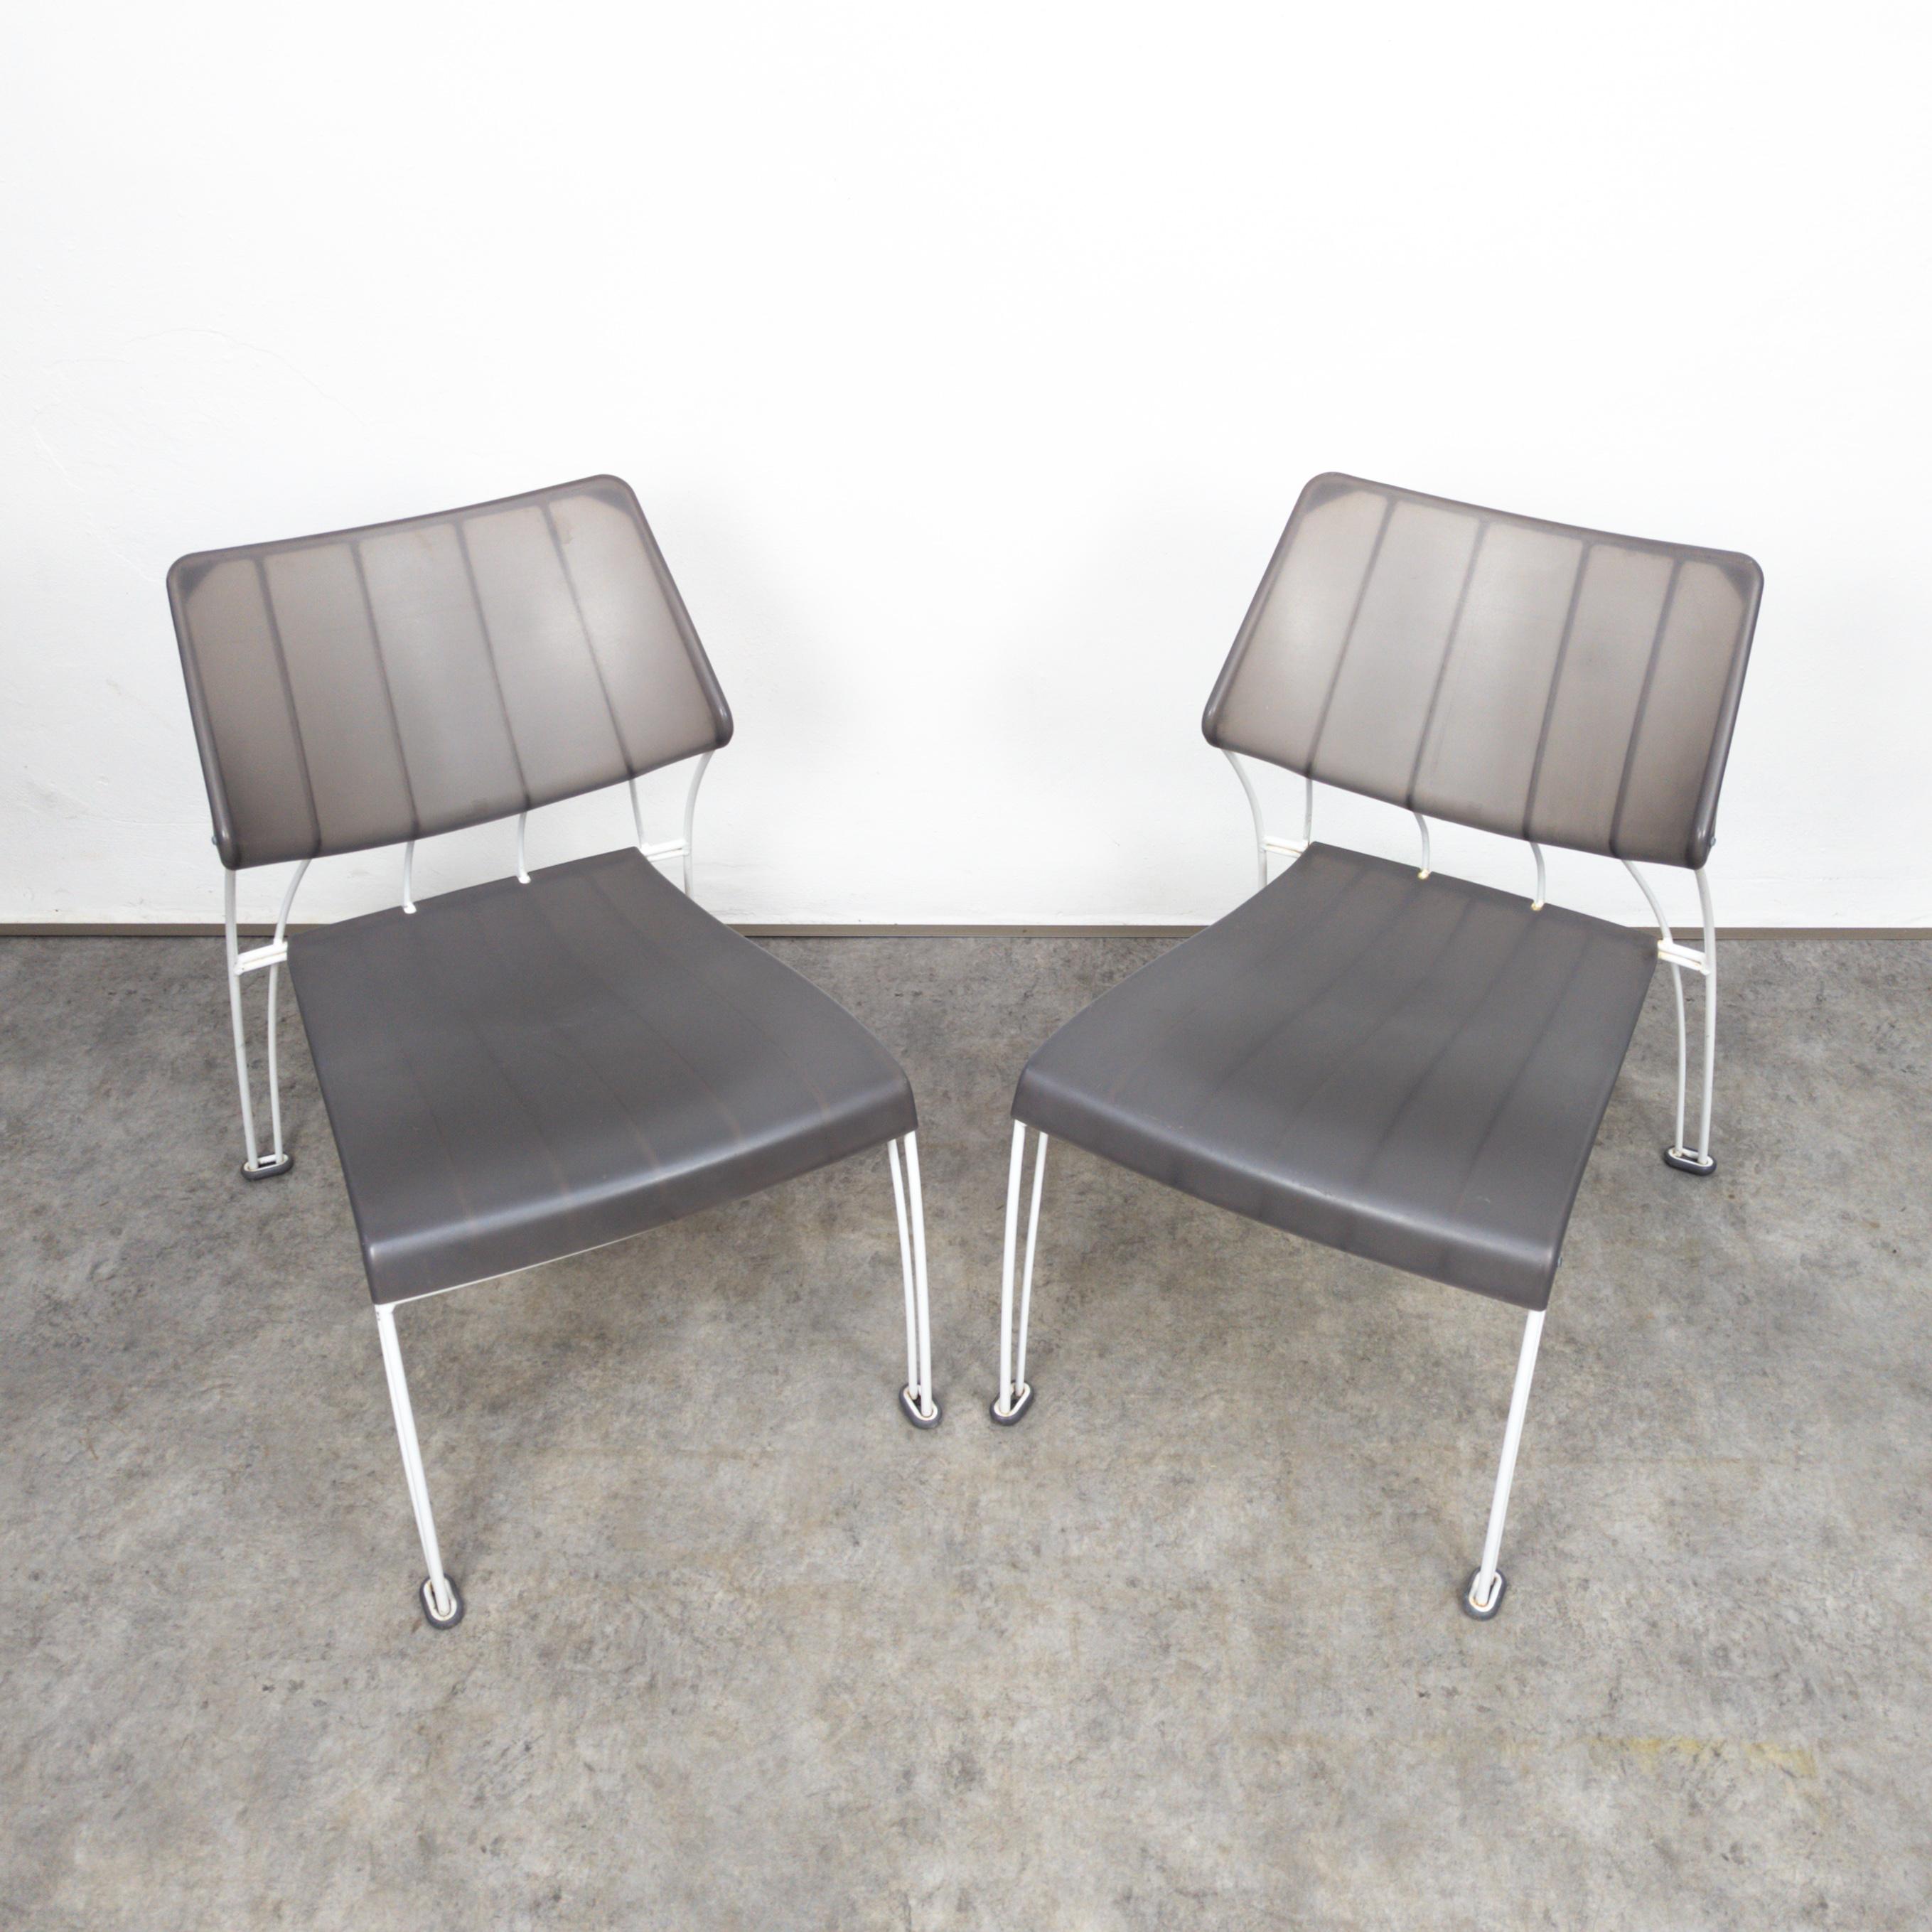 Pair of PS Hässlö outdoor lounge chairs by Monika Mulder for Ikea, 1990s For Sale 1